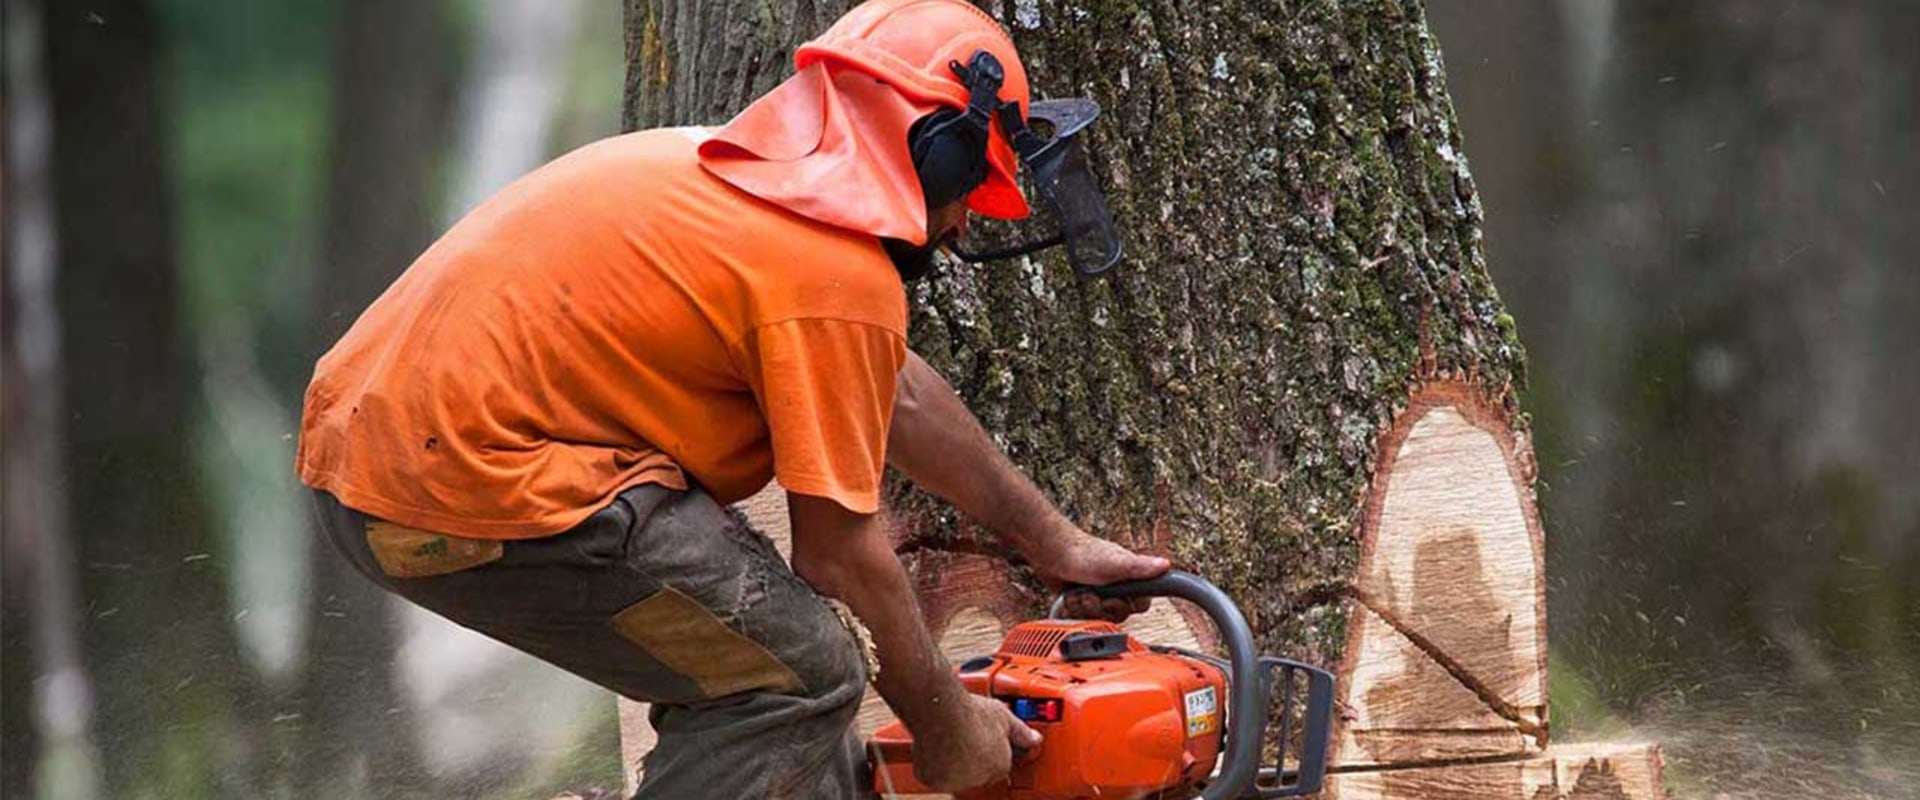 How much does it cost to cut down a 20 foot tree uk?